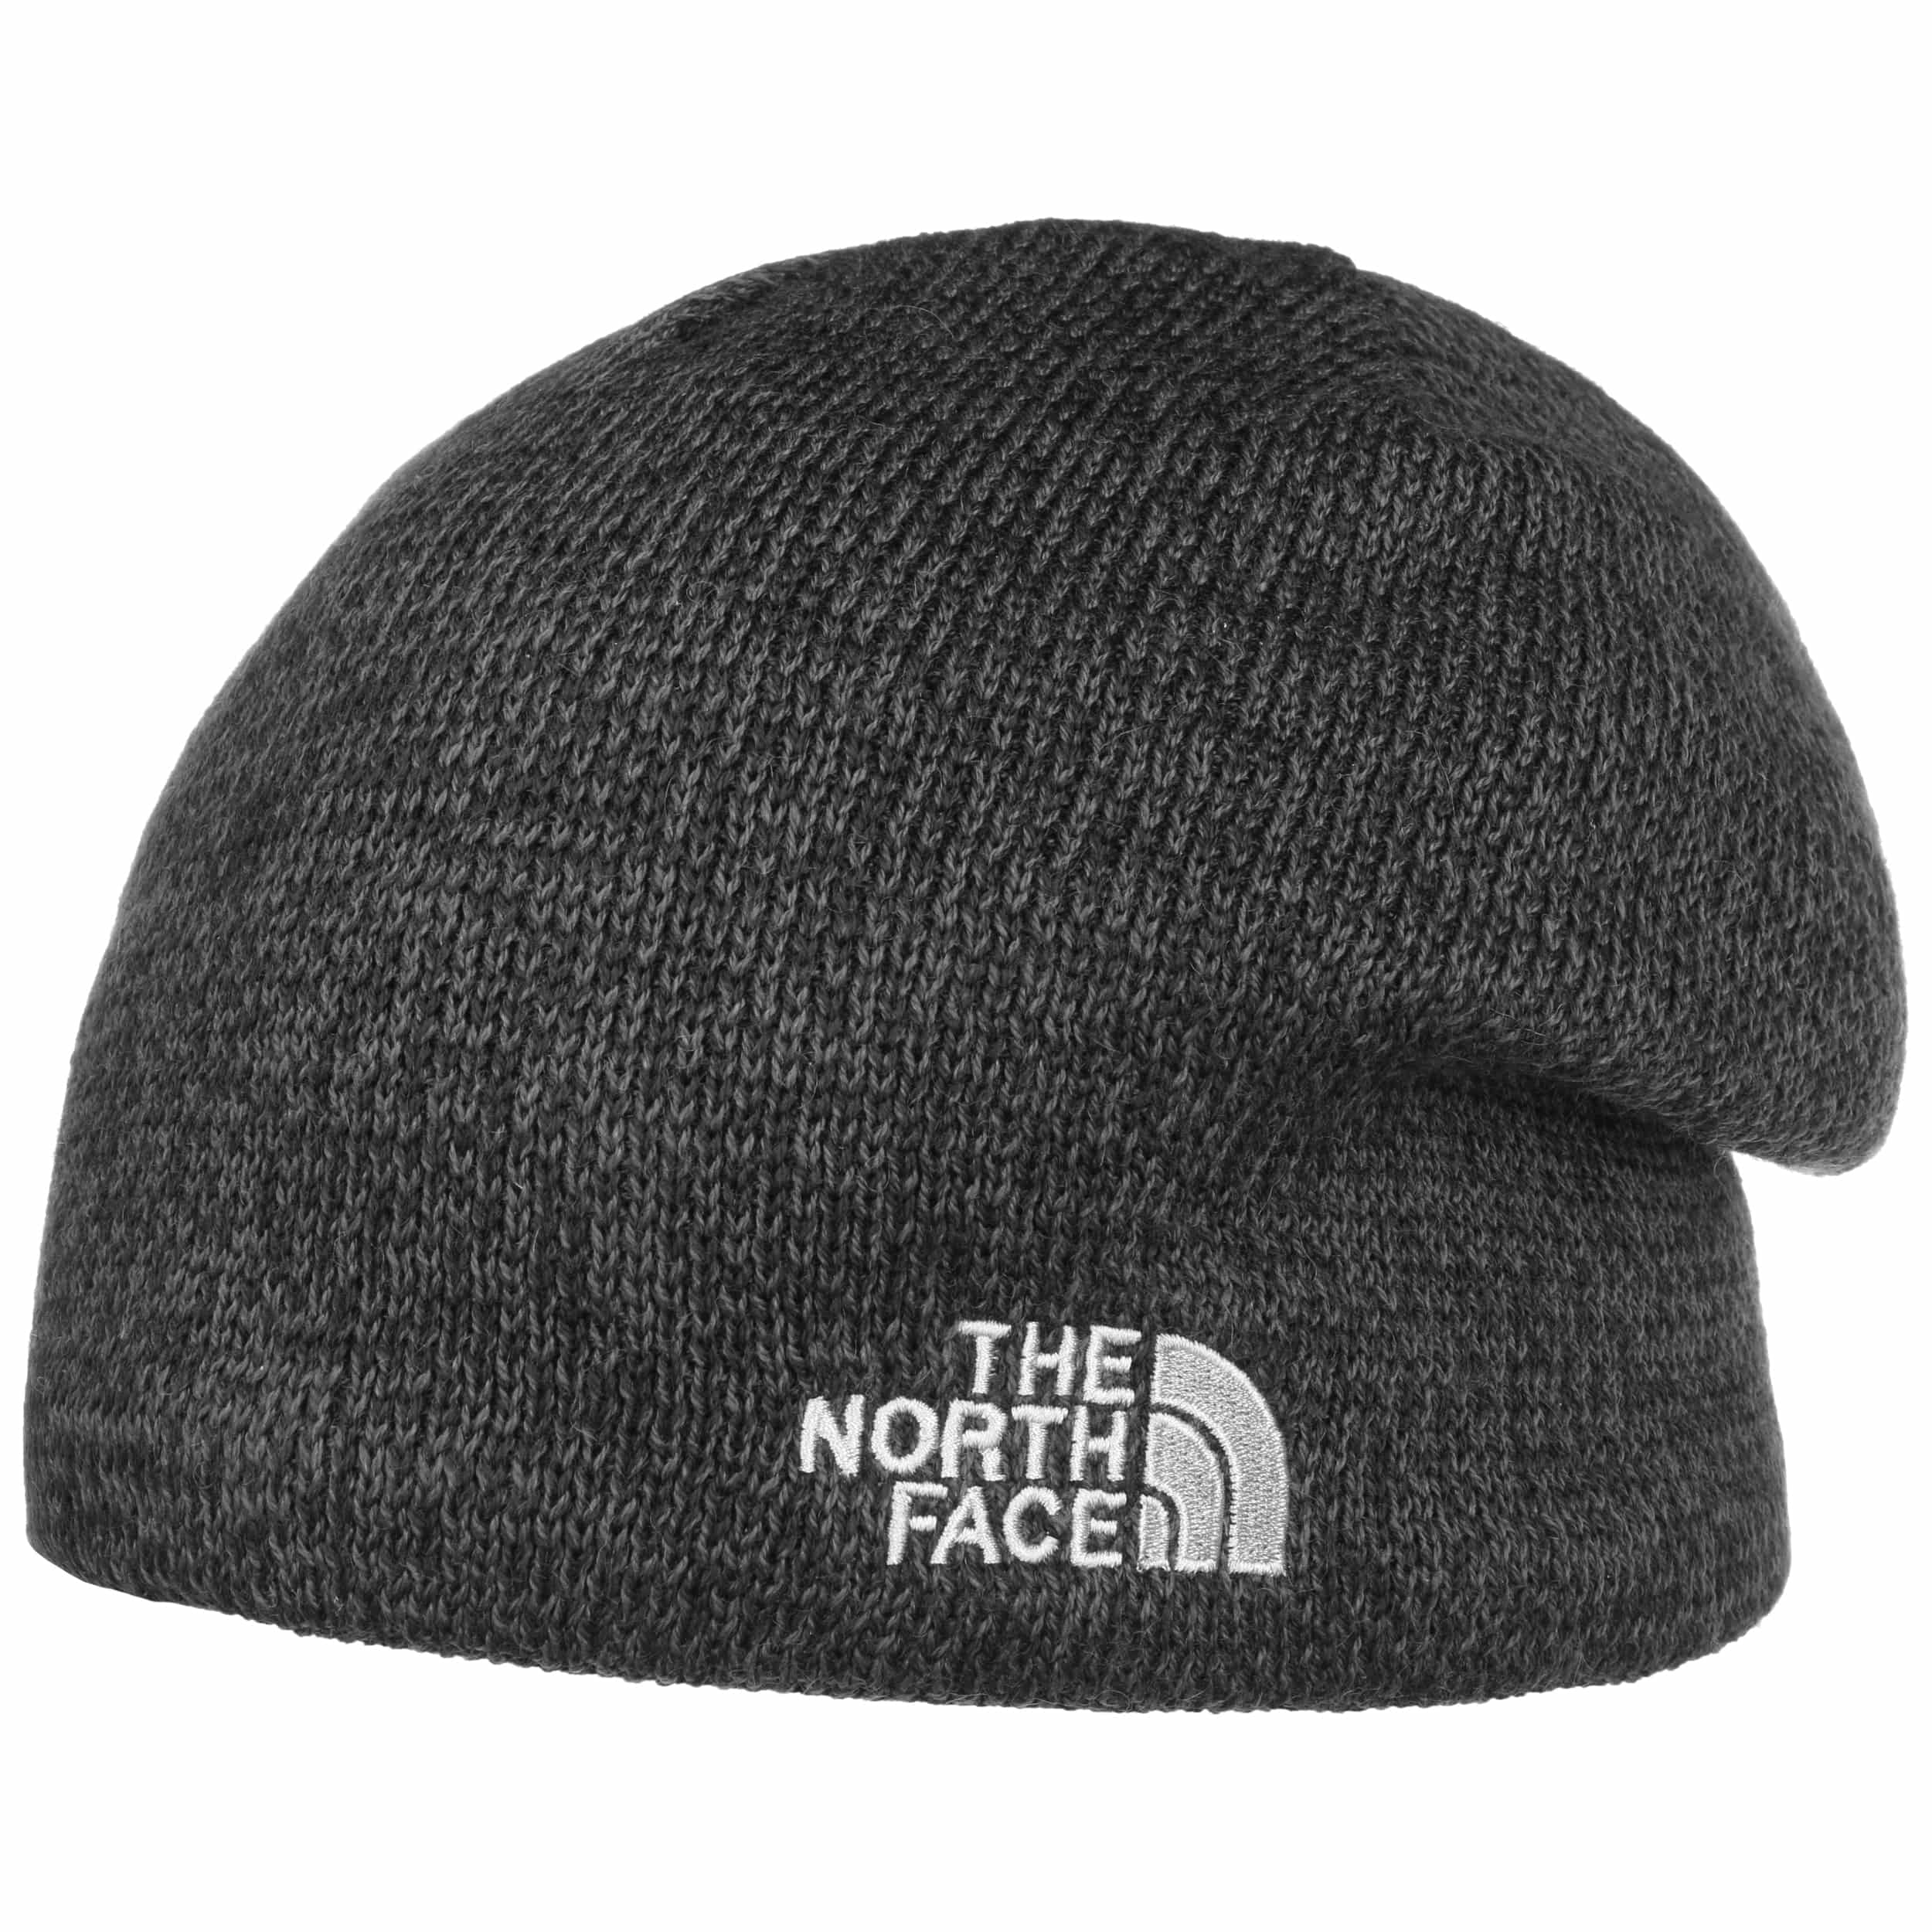 Jim Beanie Hat by The North Face - 37,95 €